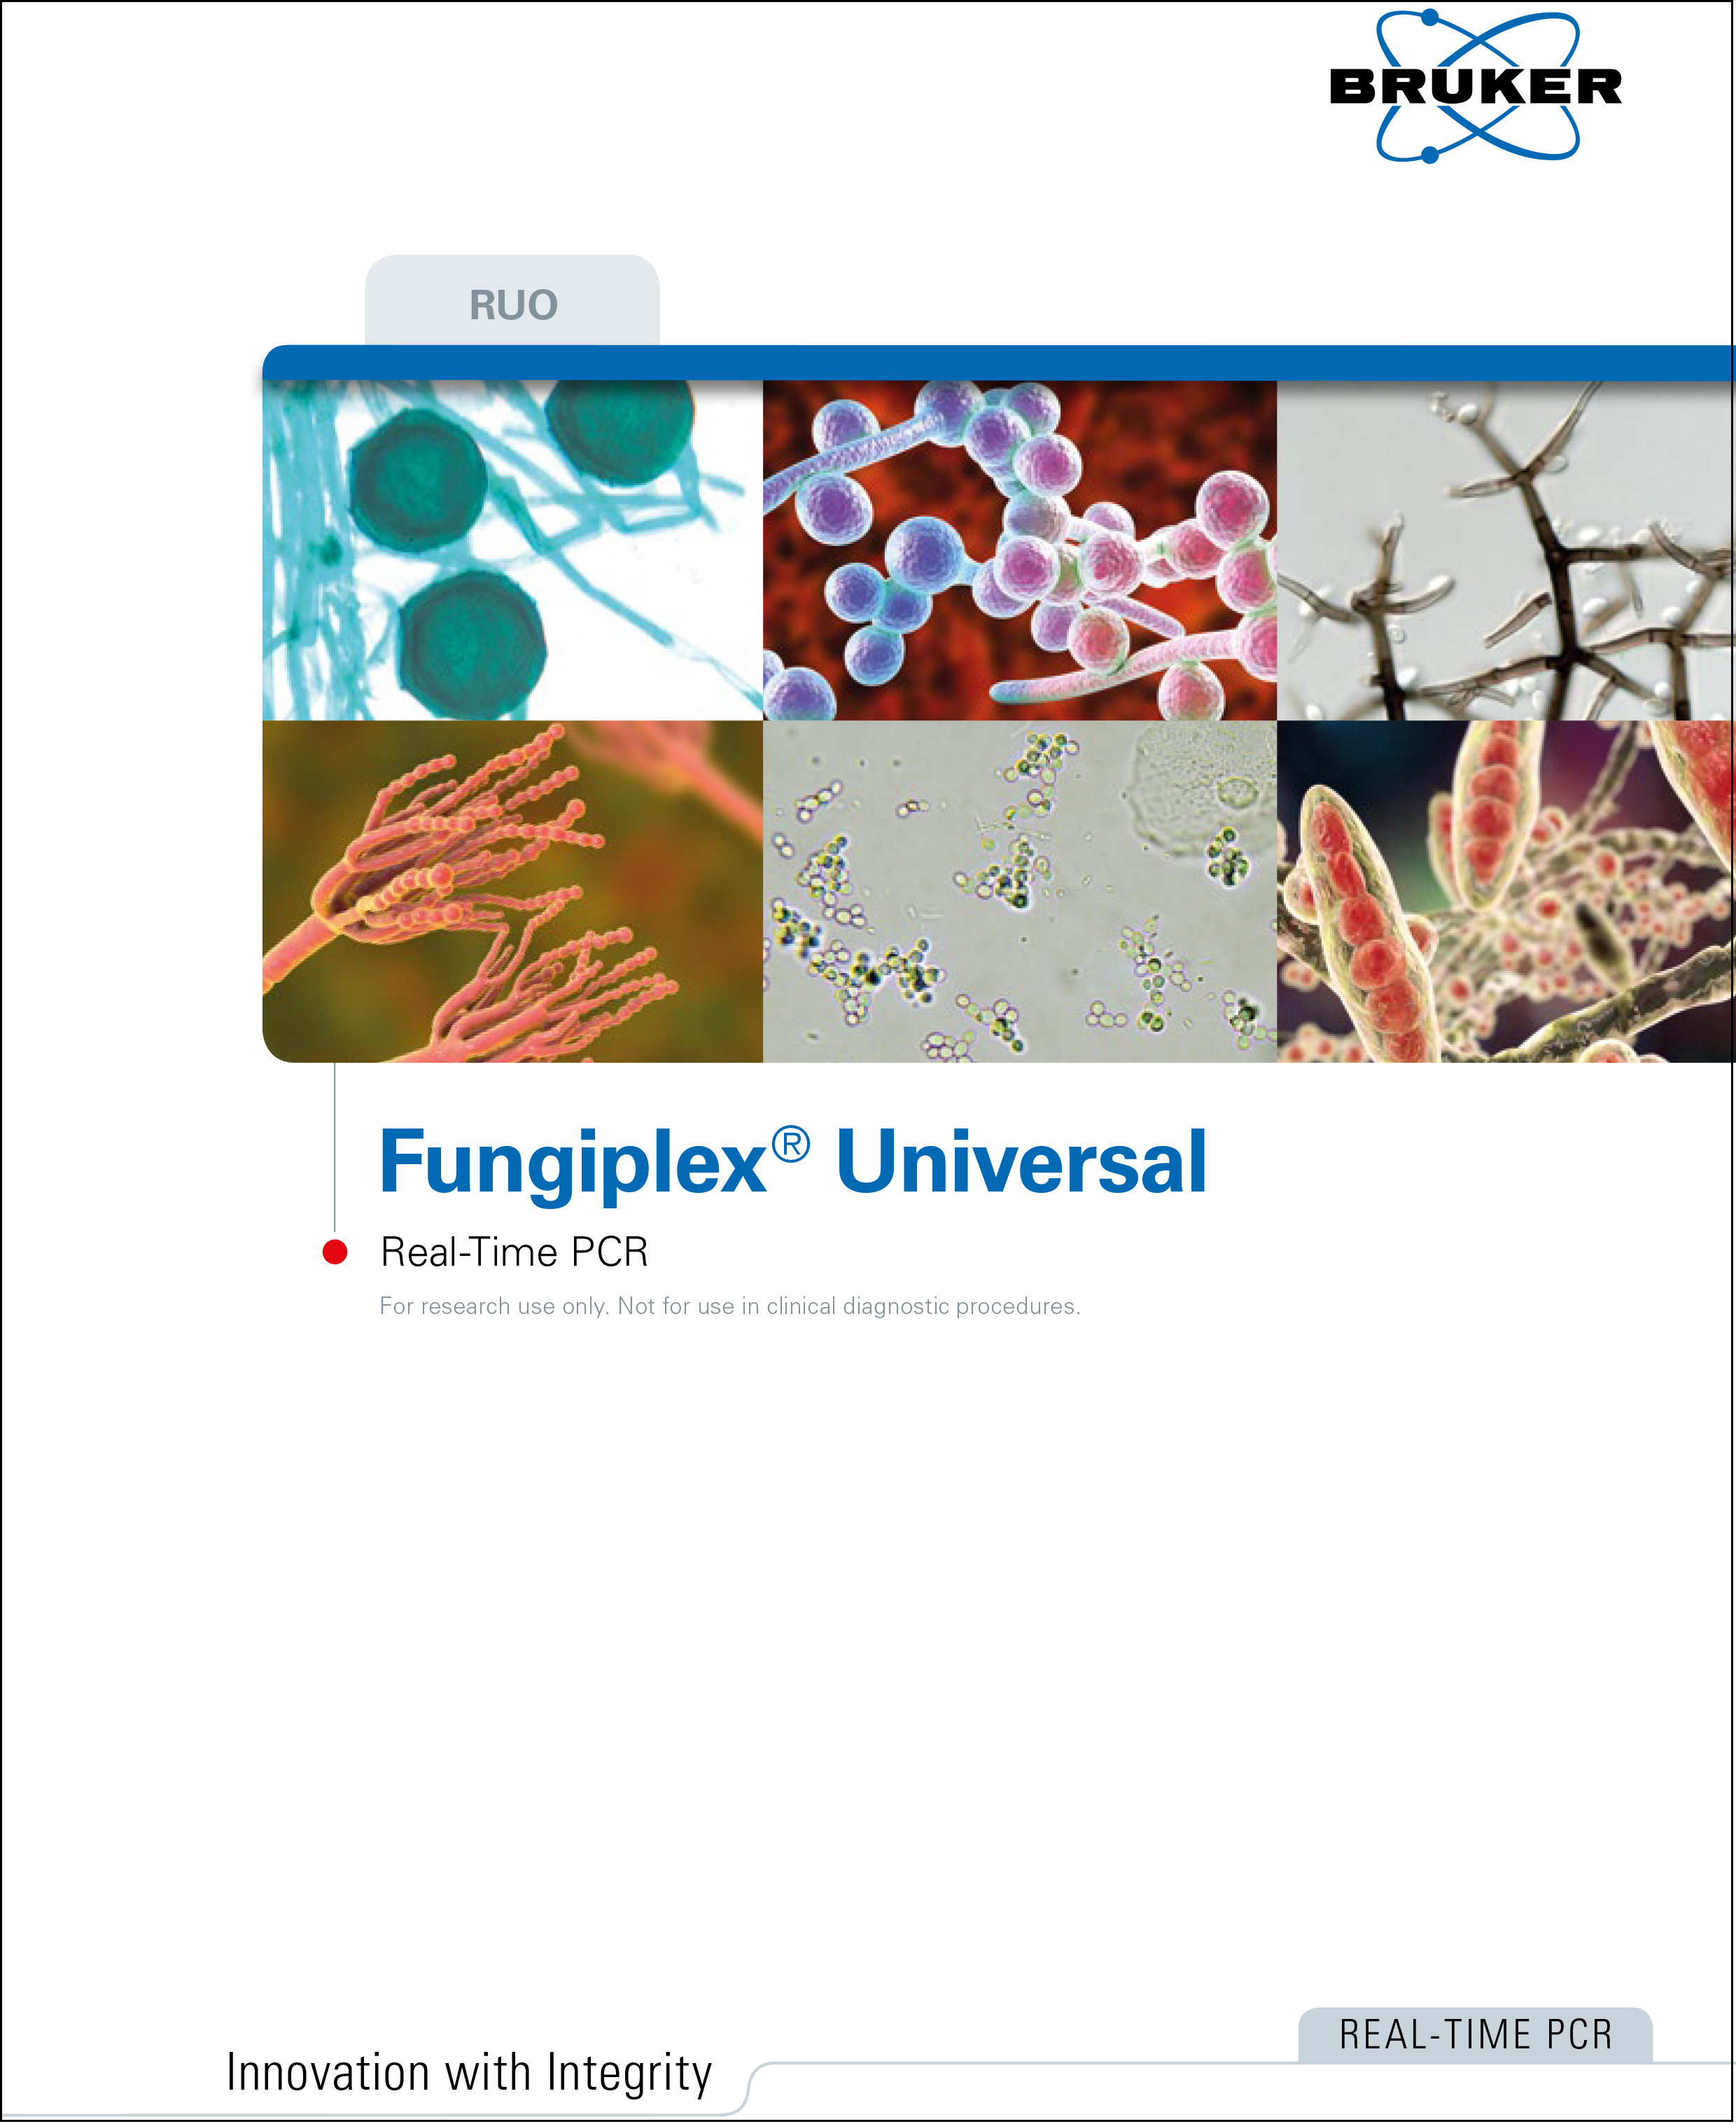 Fungiplex® Universal RUO Real-Time PCR Kit